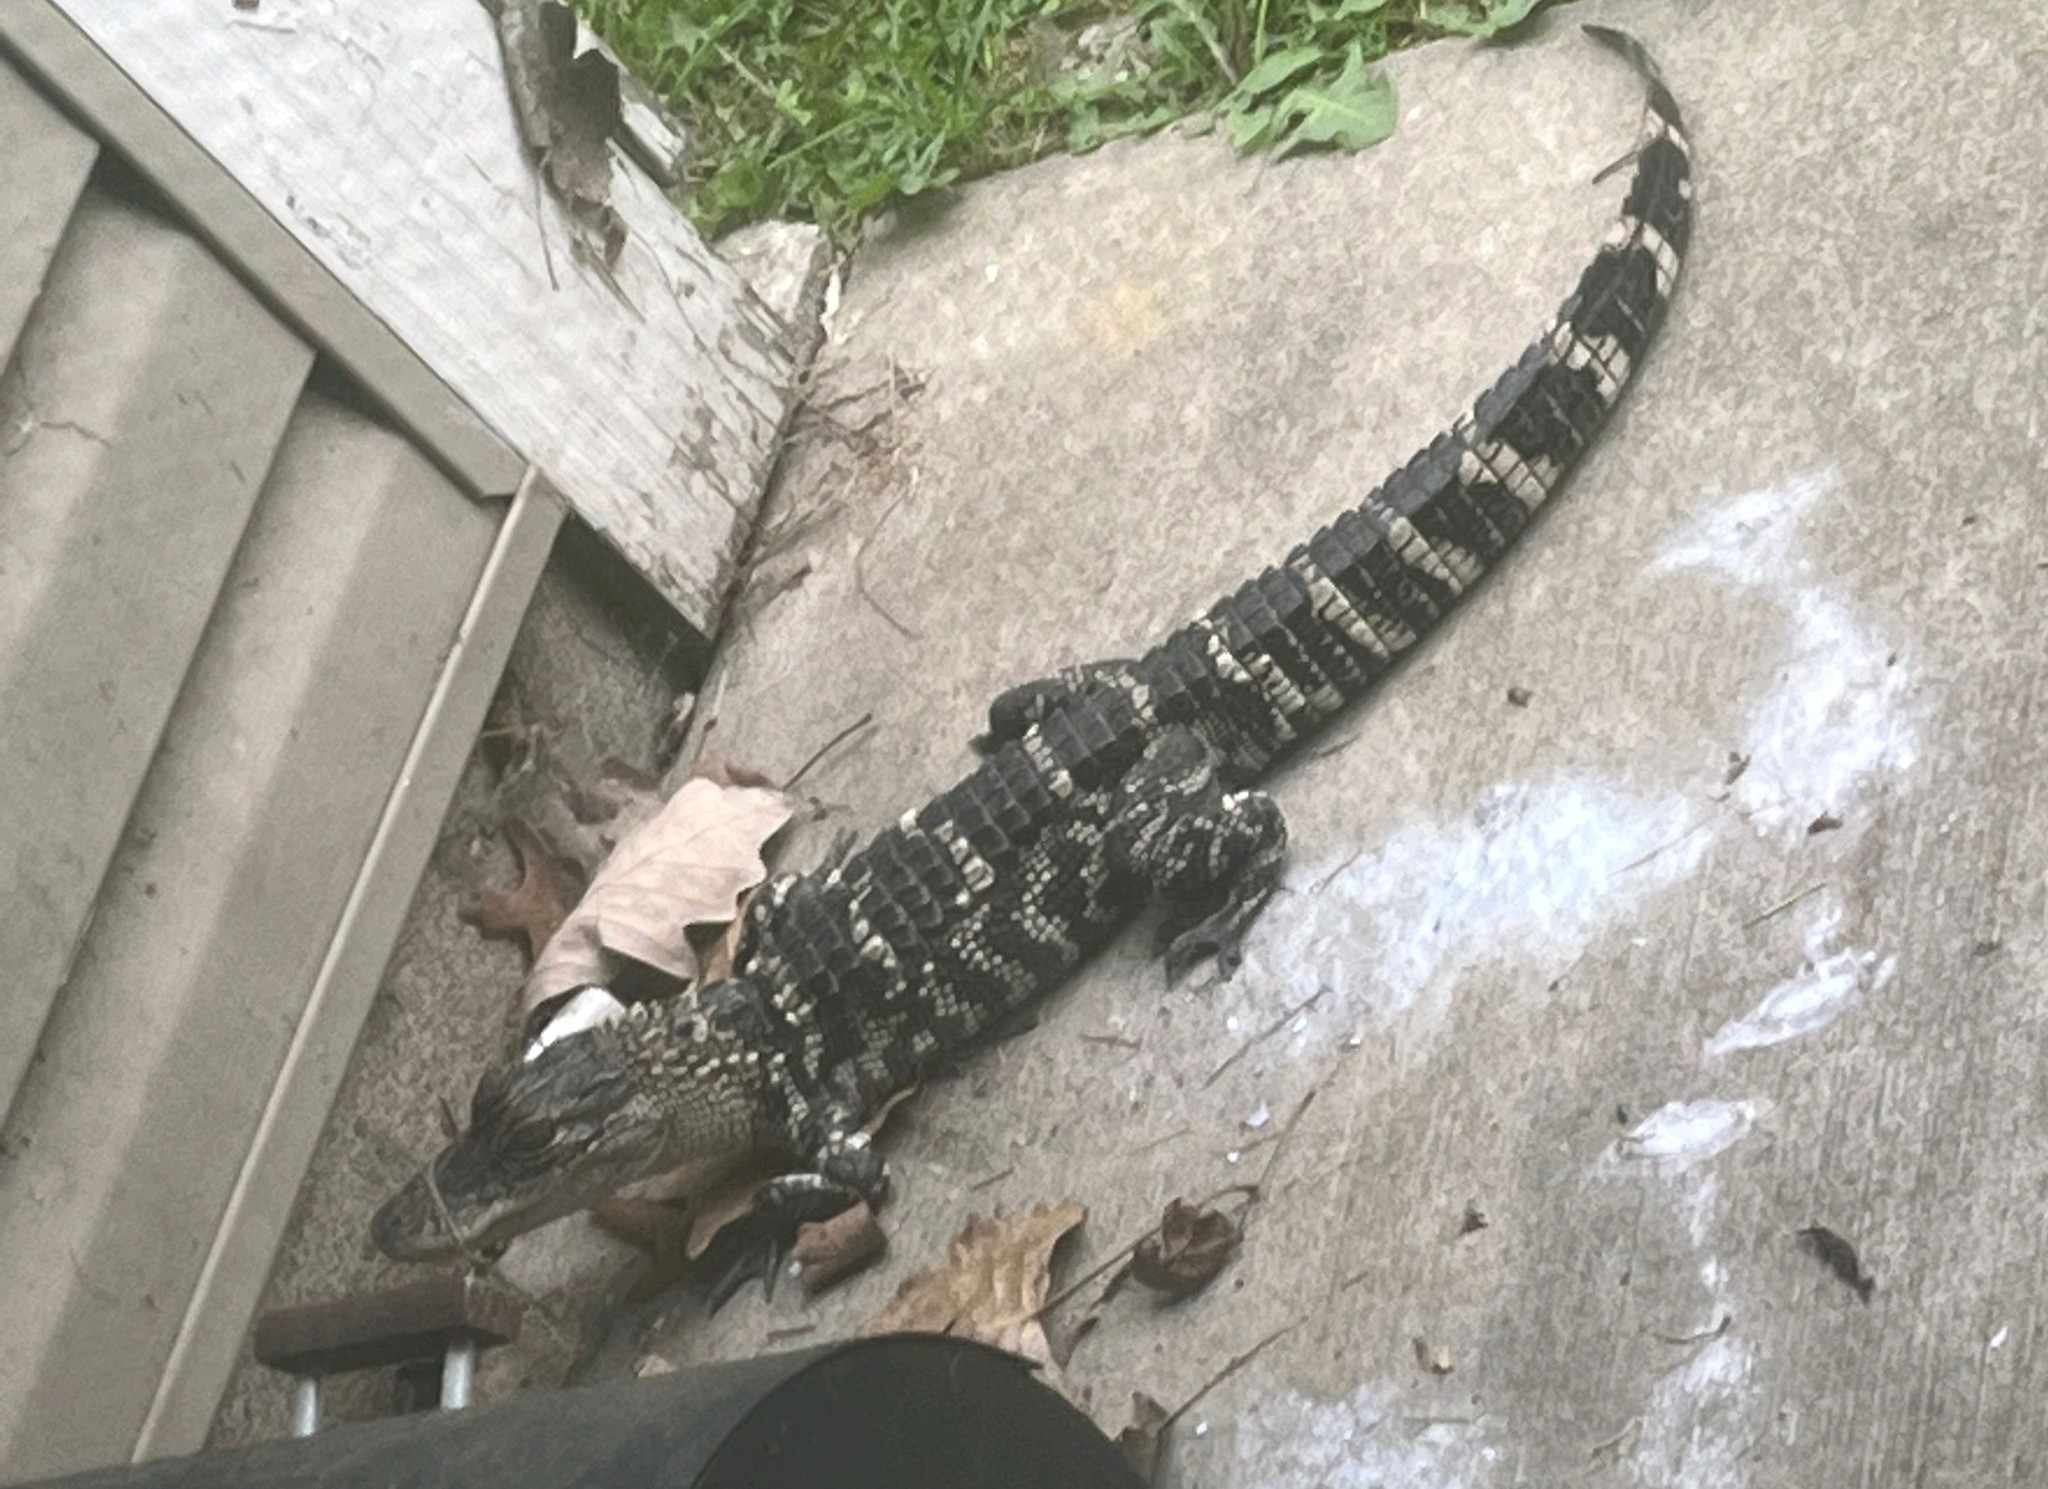 Woman Calls Police Over Huge Alligator on Her Patio